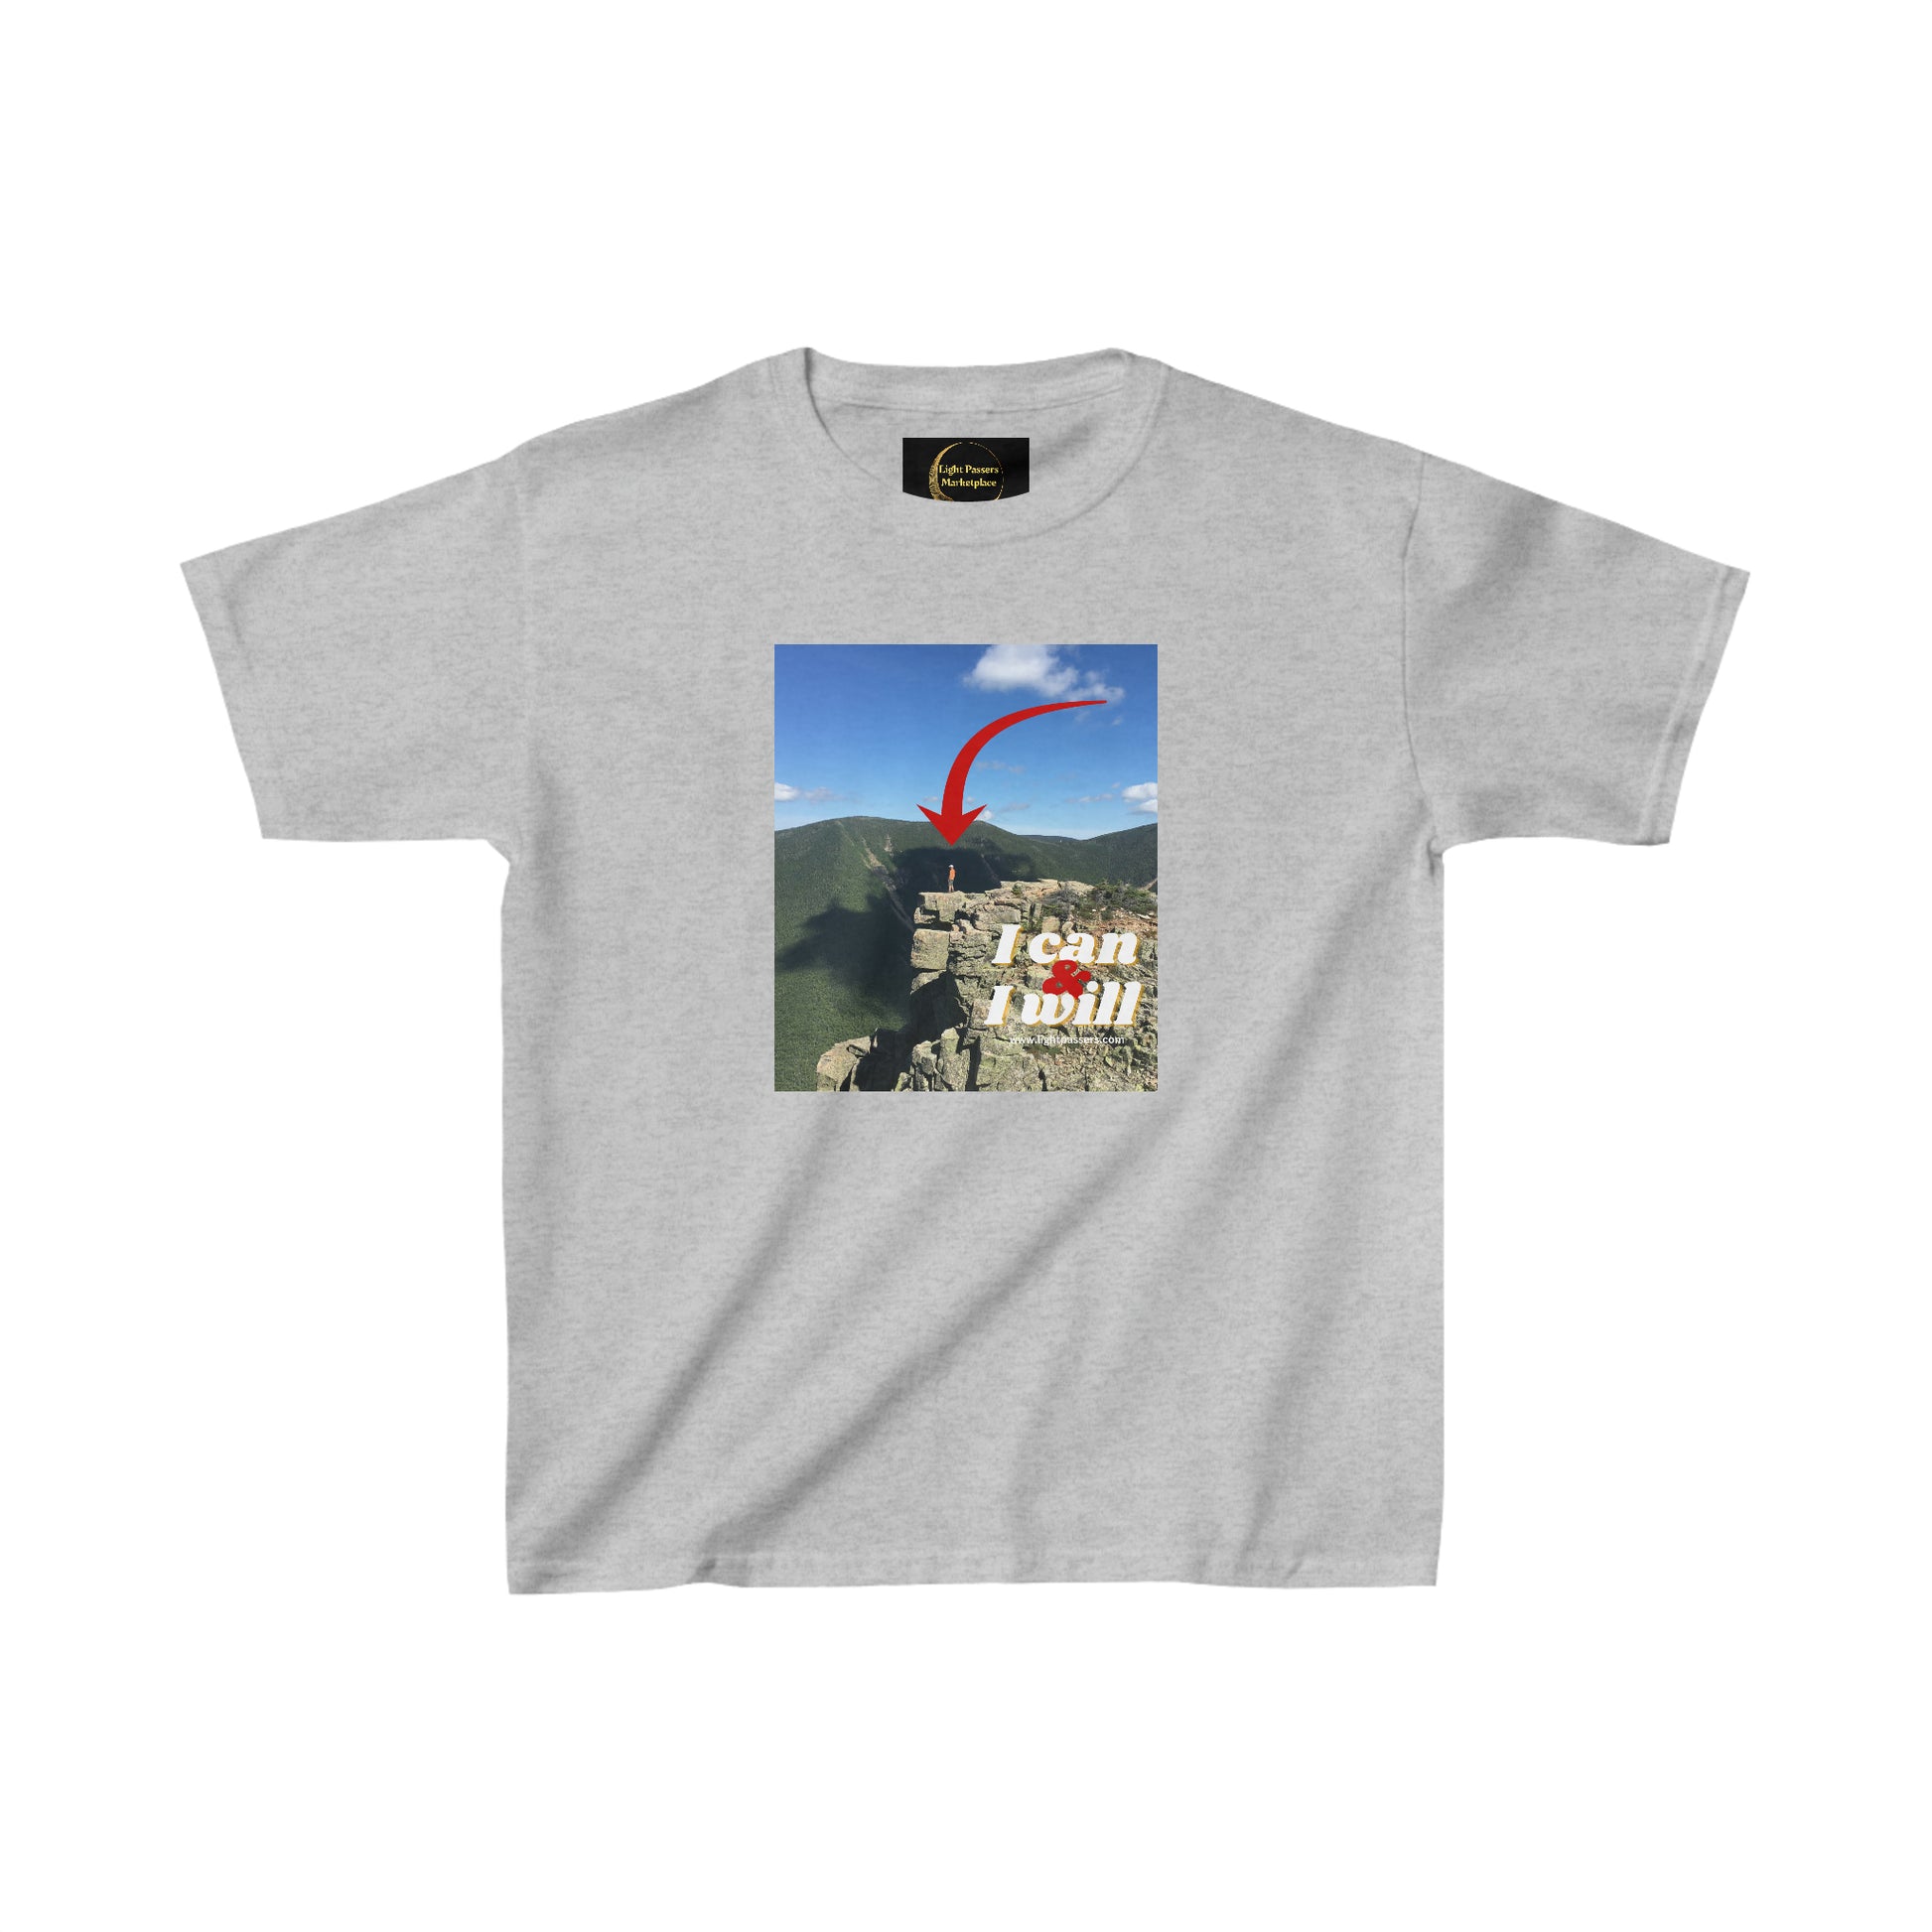 Youth t-shirt featuring a mountain print, ideal for everyday wear. Made of 100% cotton with twill tape shoulders for durability and a curl-resistant collar. Ethically sourced US cotton.